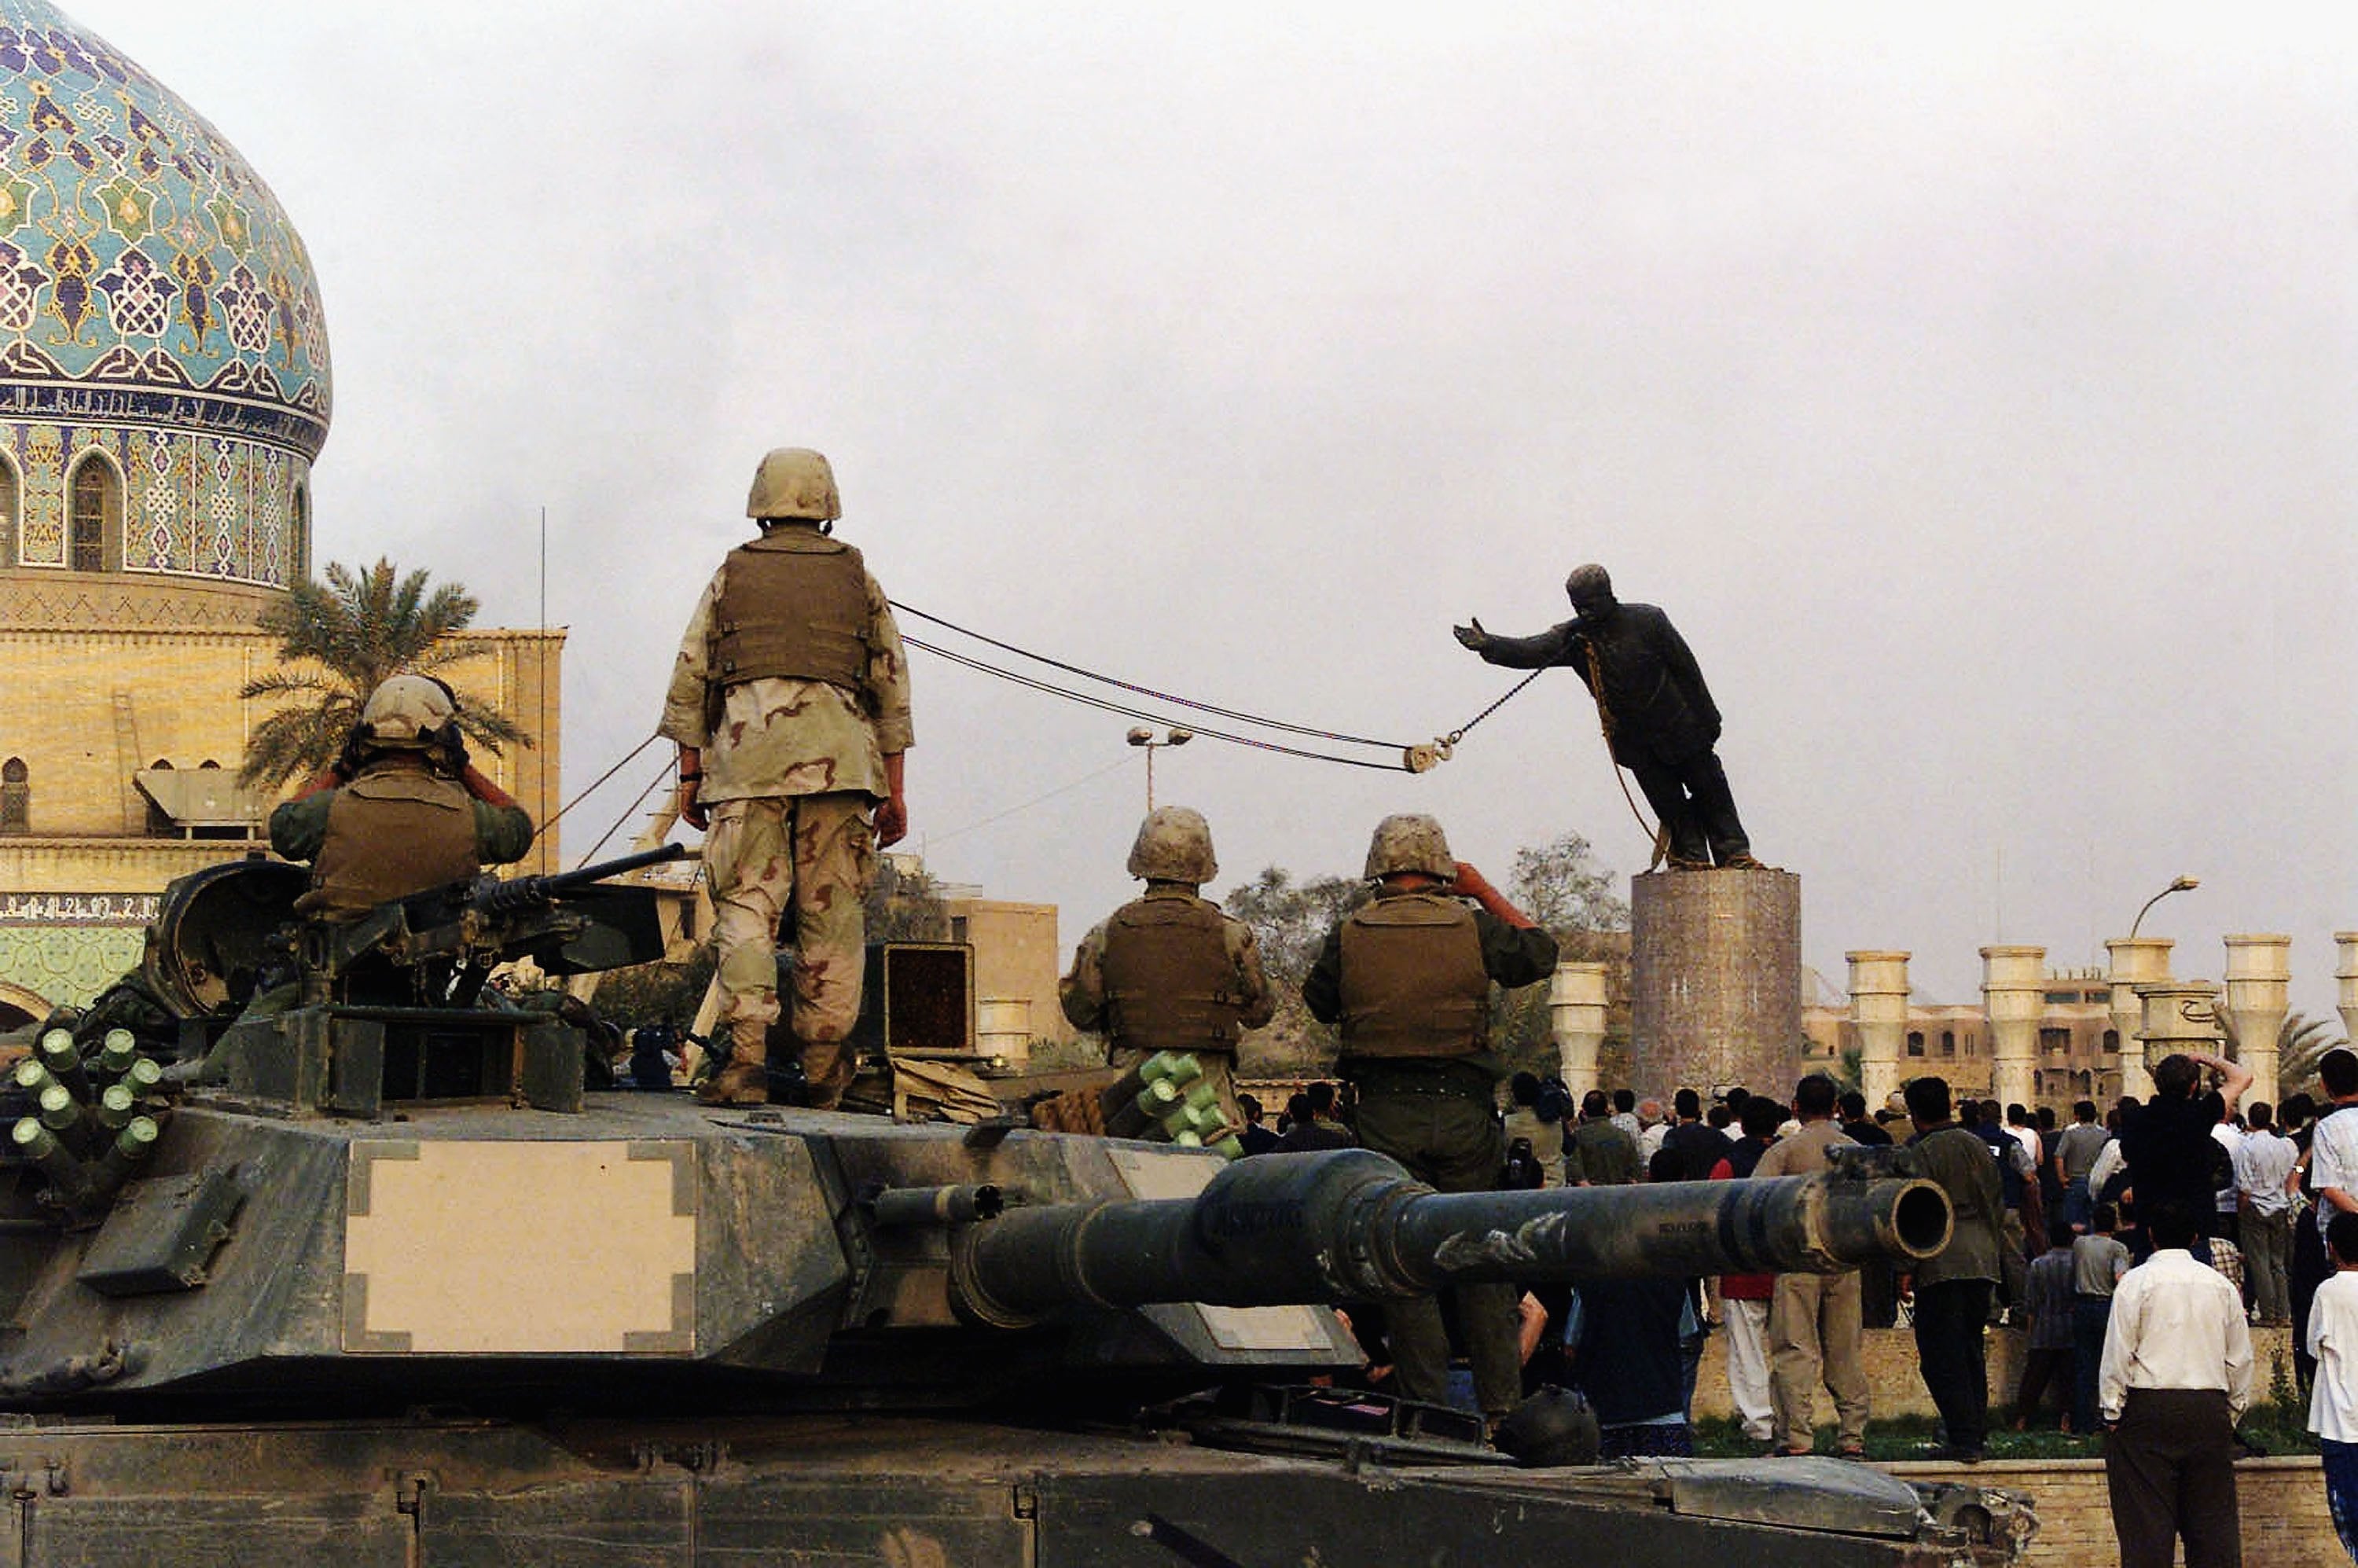 US marines and Iraqis are seen on 9 April 2003 as the statue of Iraqi dictator Saddam Hussein is toppled at al-Fardous square in Baghdad, Iraq